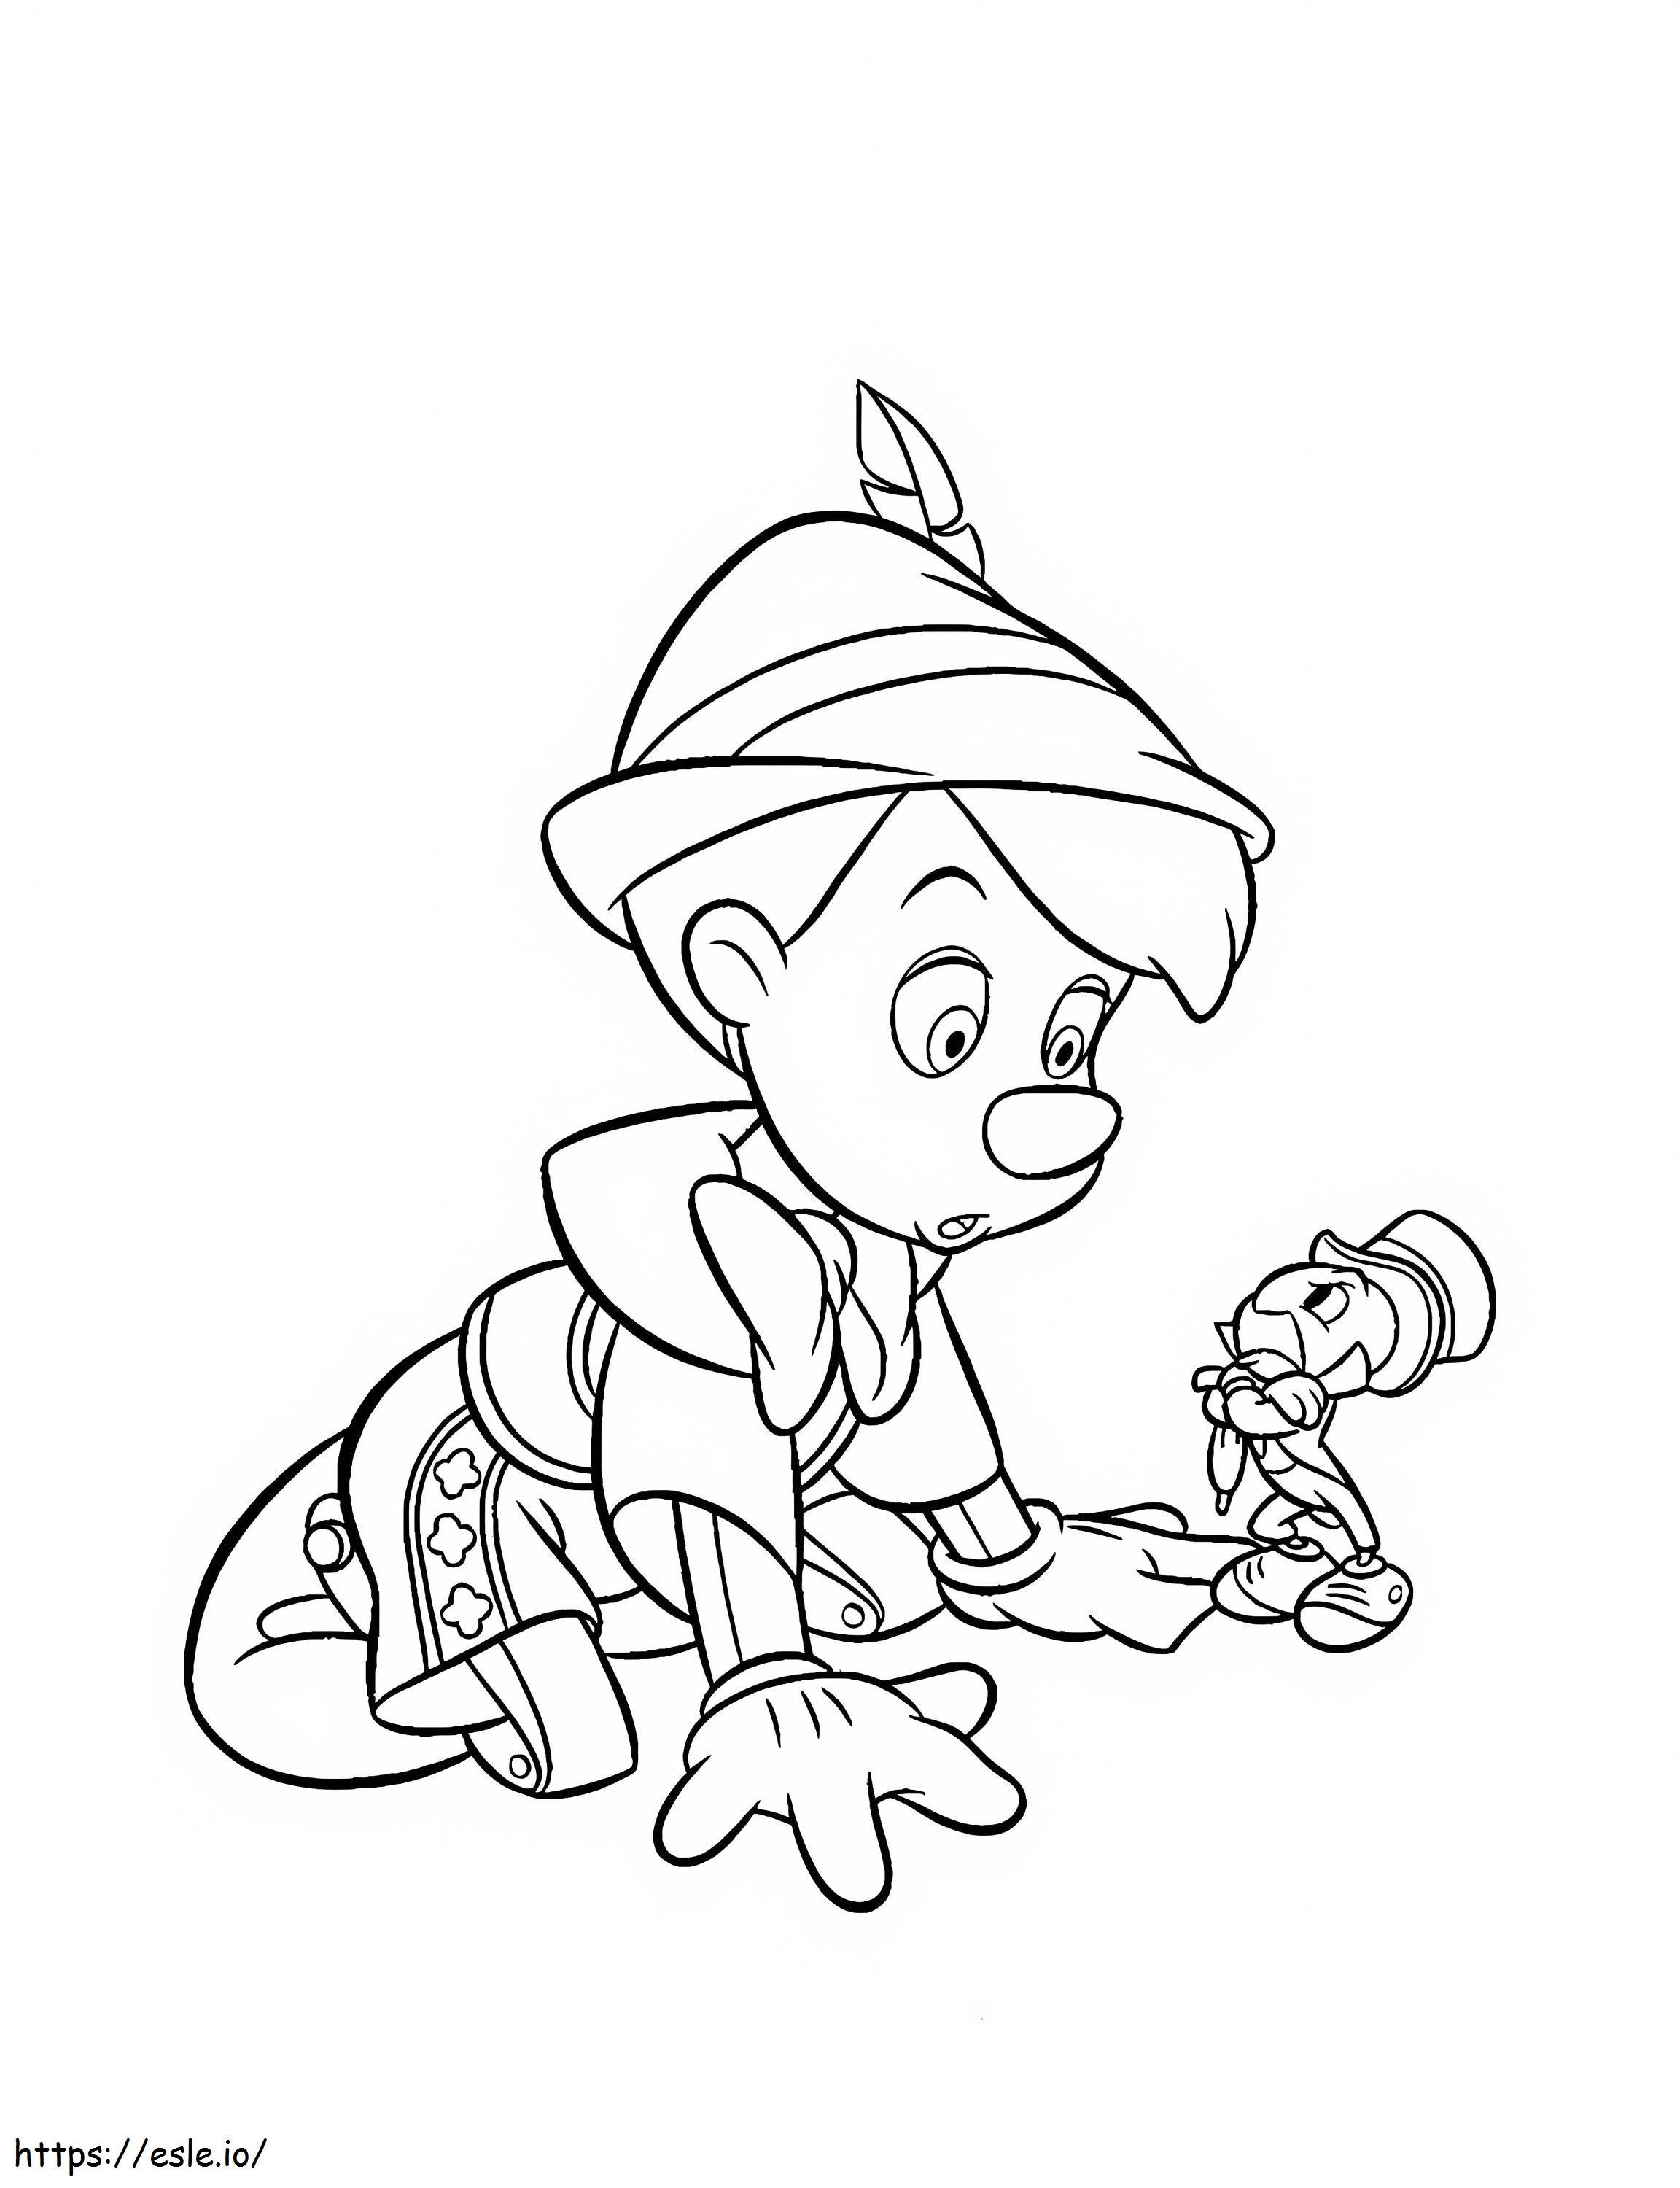 Pinocchio 5 coloring page